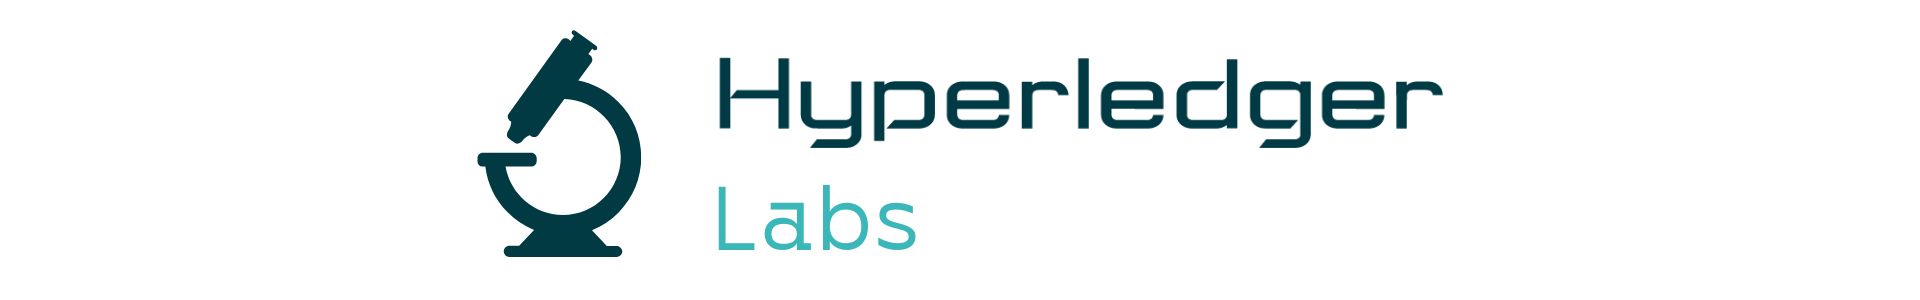 Hyperledger New Brand Icons & Stats (1920 × 300 px)